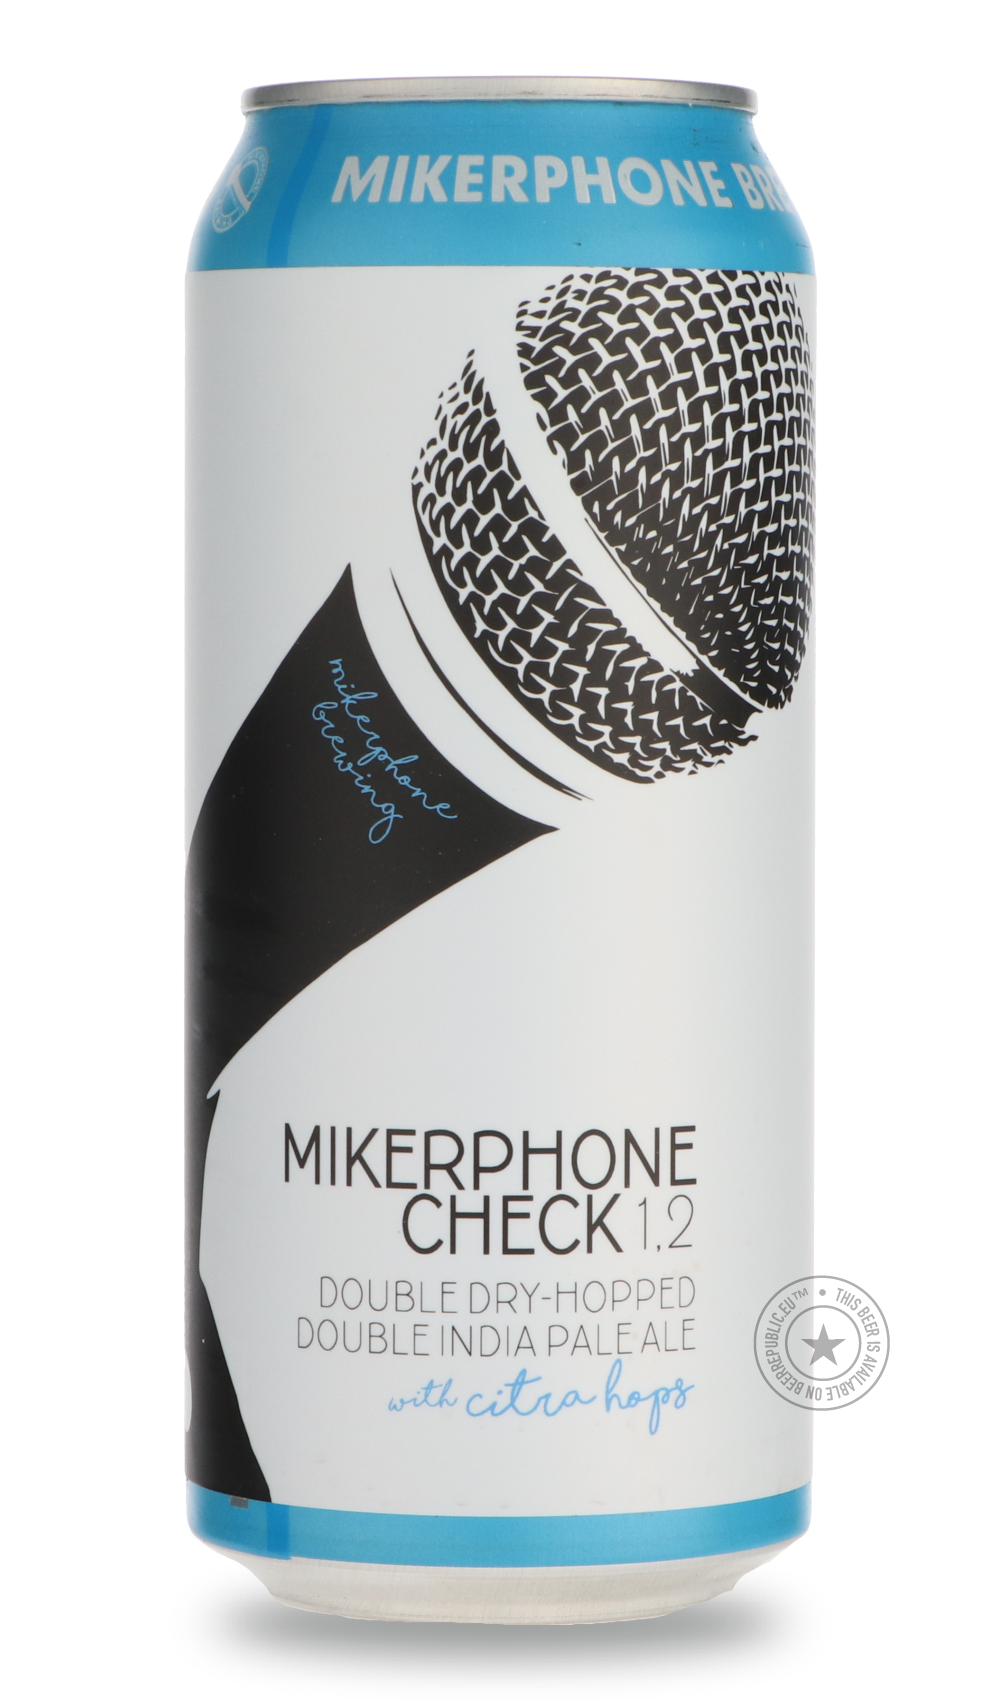 -Mikerphone- Mikerphone Check 1, 2-IPA- Only @ Beer Republic - The best online beer store for American & Canadian craft beer - Buy beer online from the USA and Canada - Bier online kopen - Amerikaans bier kopen - Craft beer store - Craft beer kopen - Amerikanisch bier kaufen - Bier online kaufen - Acheter biere online - IPA - Stout - Porter - New England IPA - Hazy IPA - Imperial Stout - Barrel Aged - Barrel Aged Imperial Stout - Brown - Dark beer - Blond - Blonde - Pilsner - Lager - Wheat - Weizen - Amber 